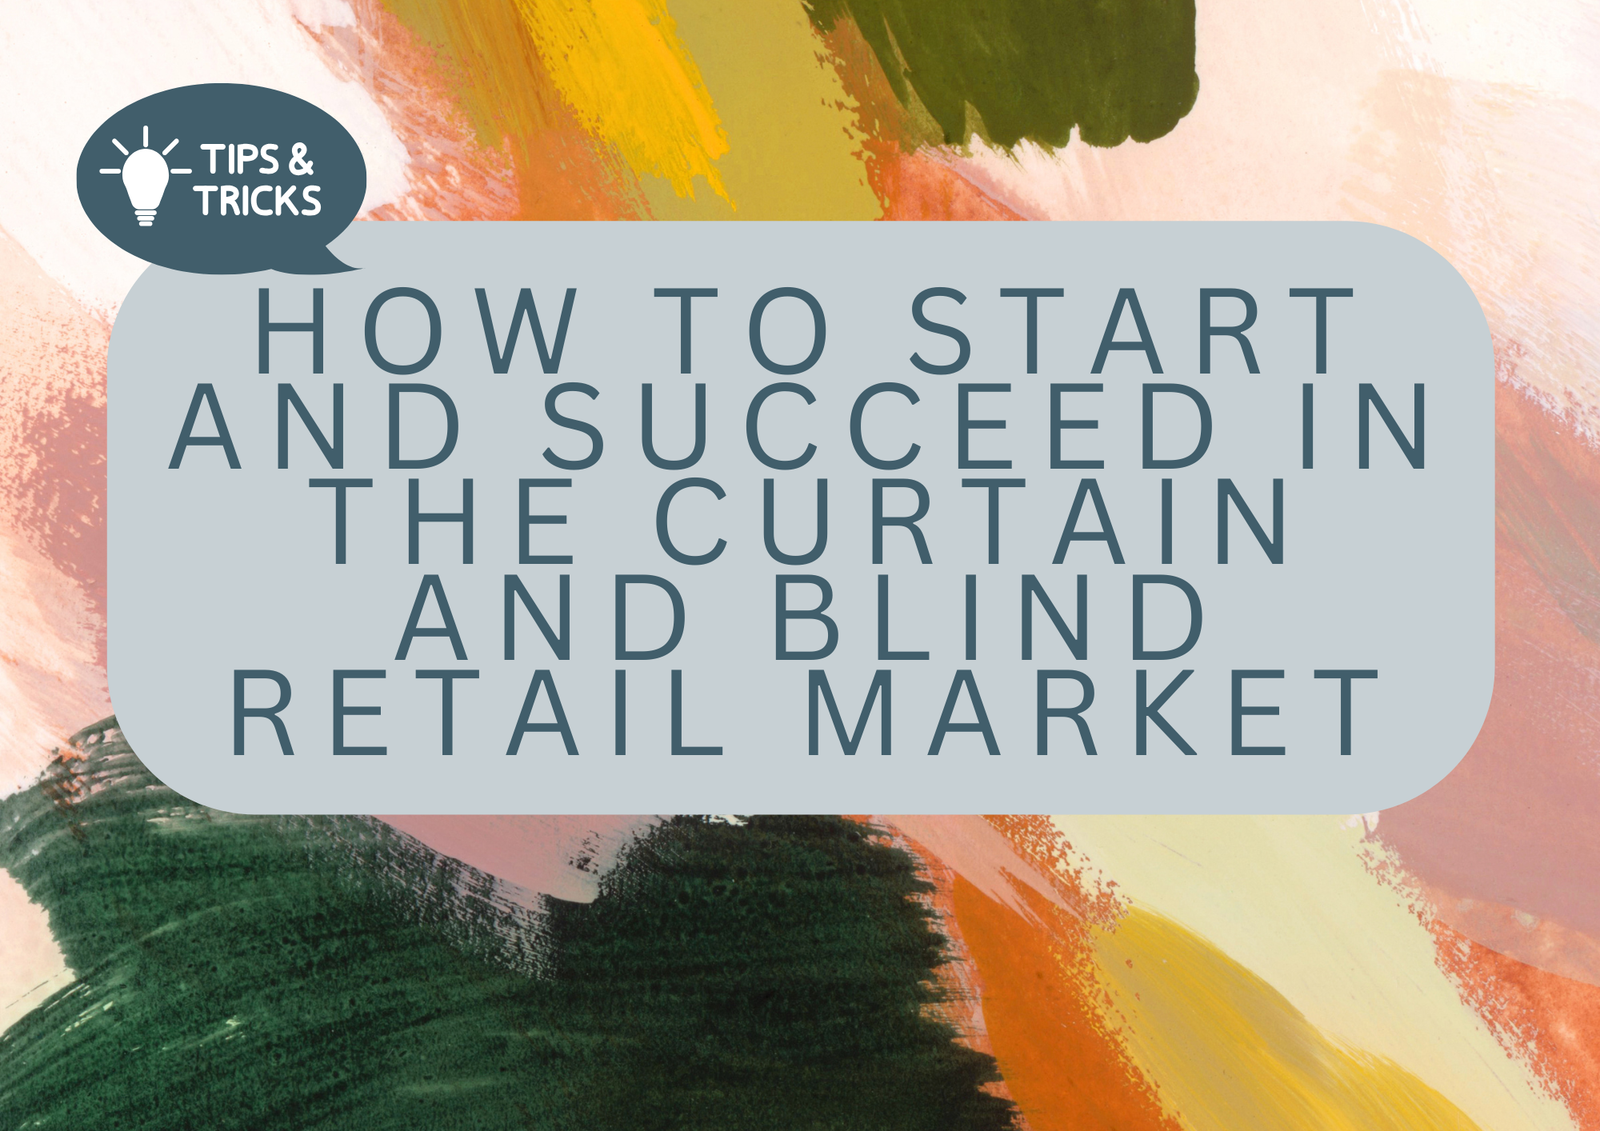 How to start and succeed in the curtain and blind retail market